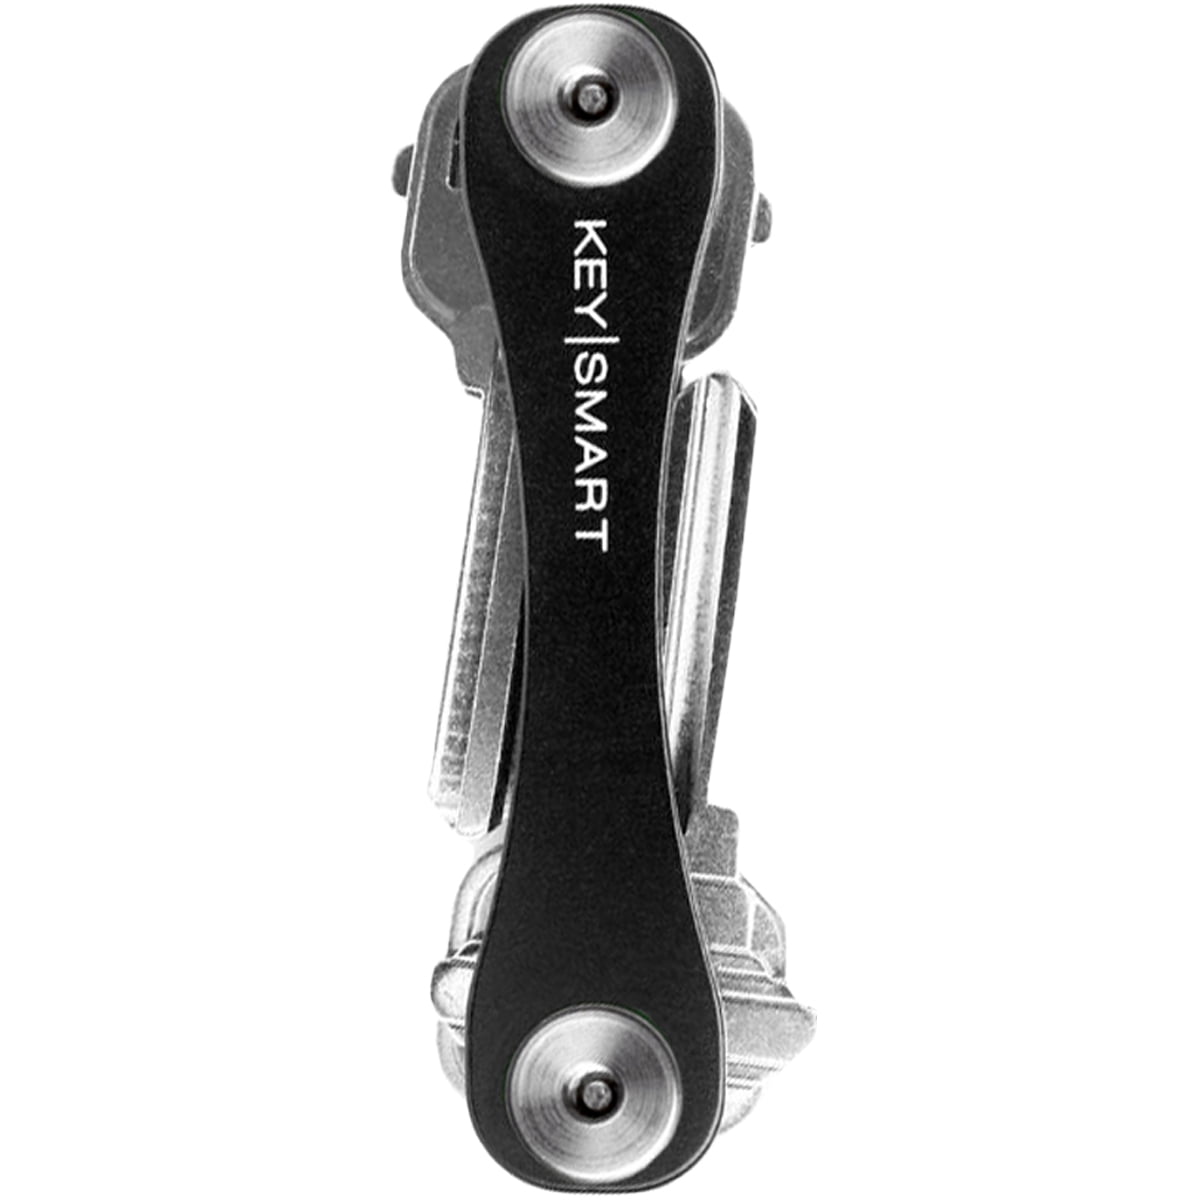 KeySmart Compact Key Holder with Expansion Pack (Black, new